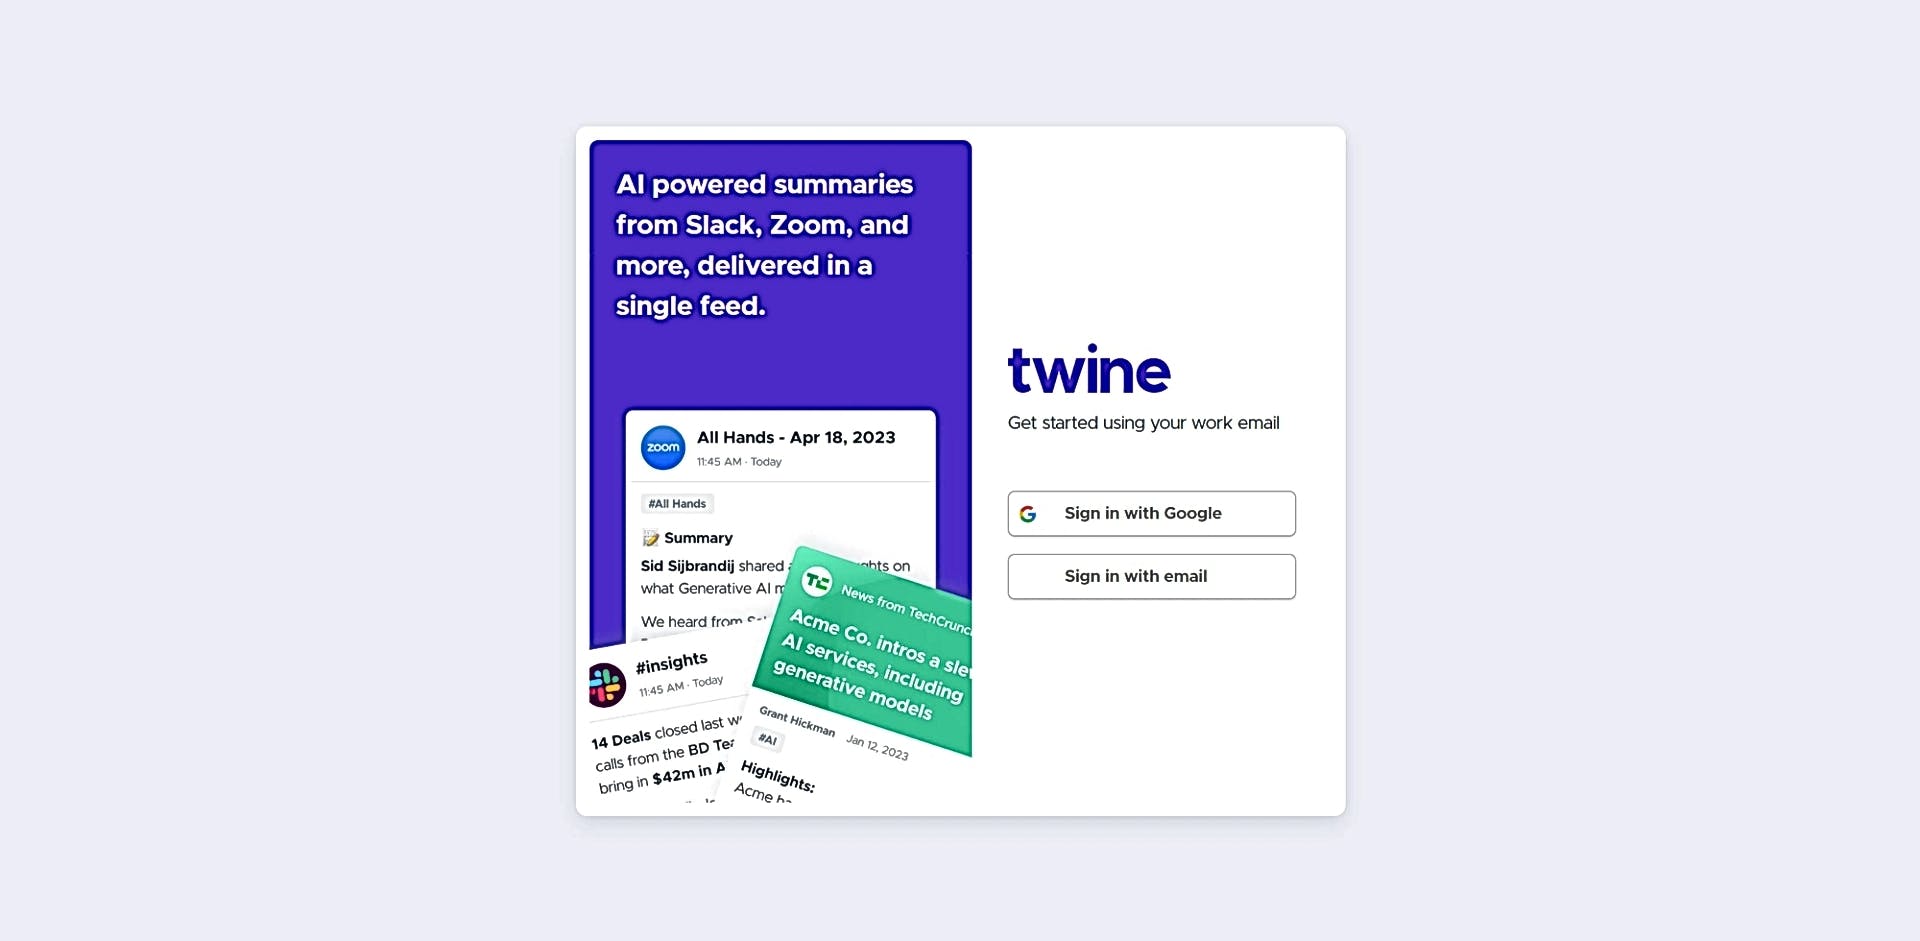 Twine Ambient featured